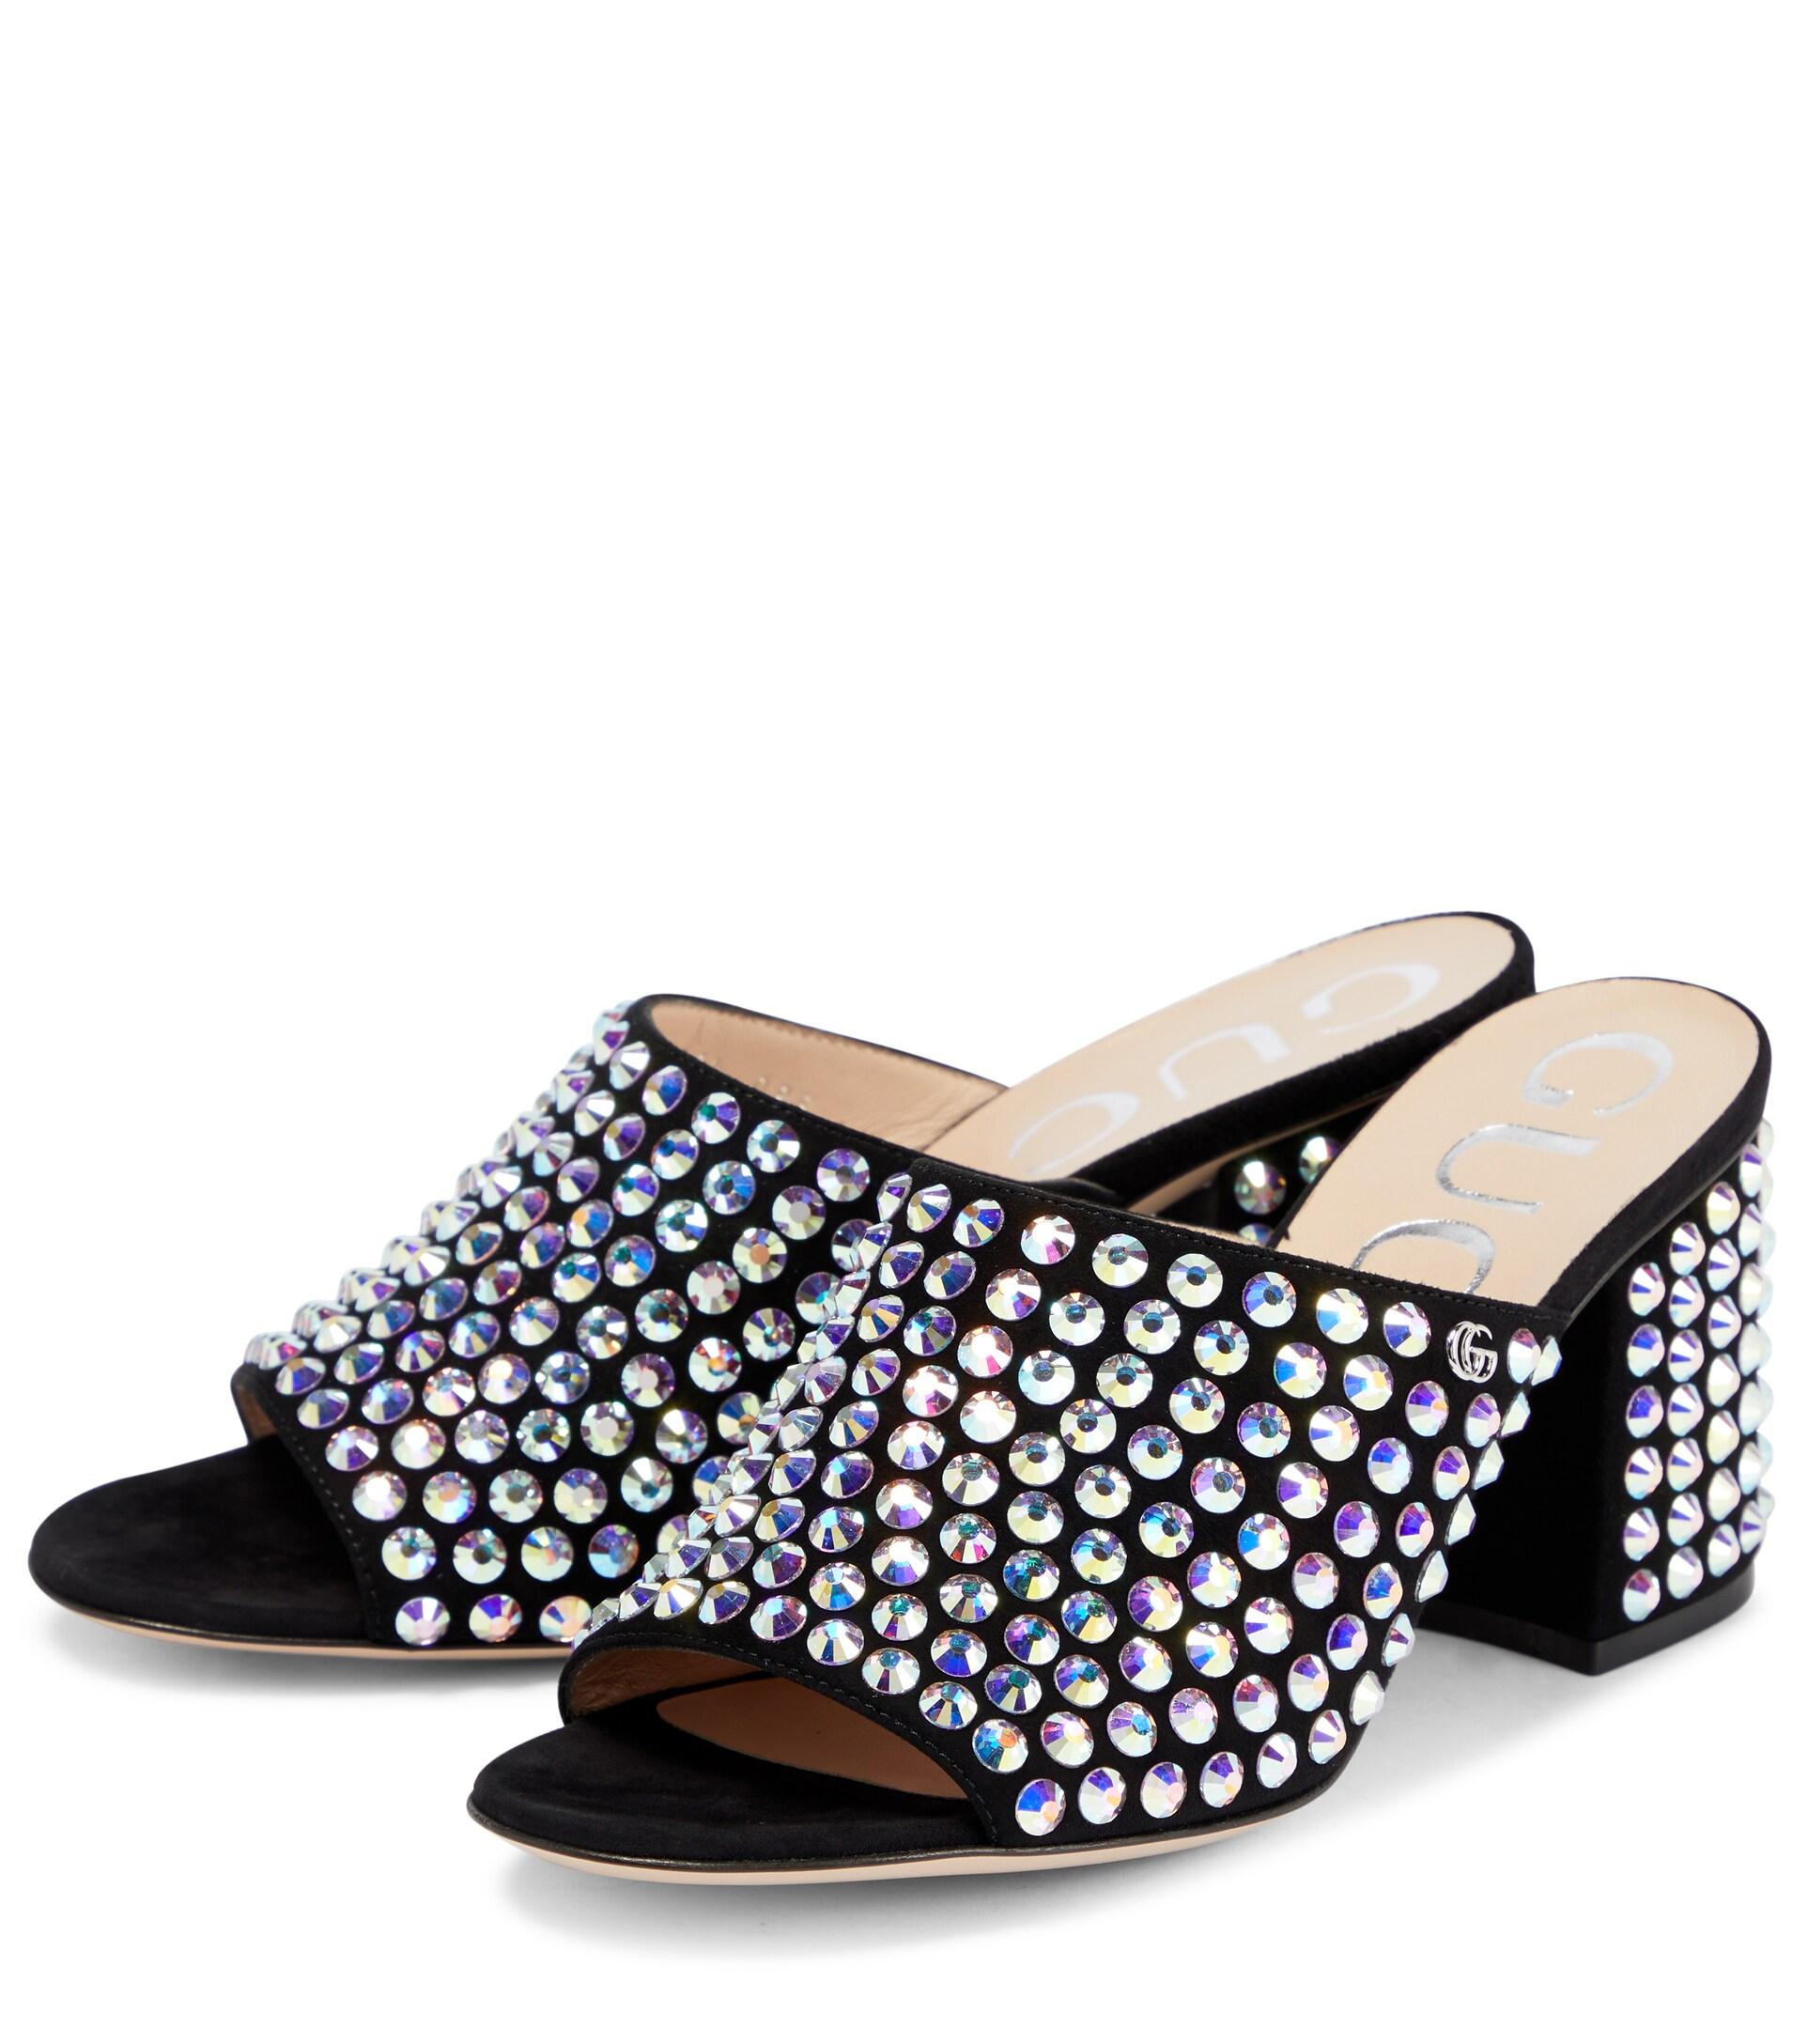 Gucci Embellished Suede Mules in Black | Lyst